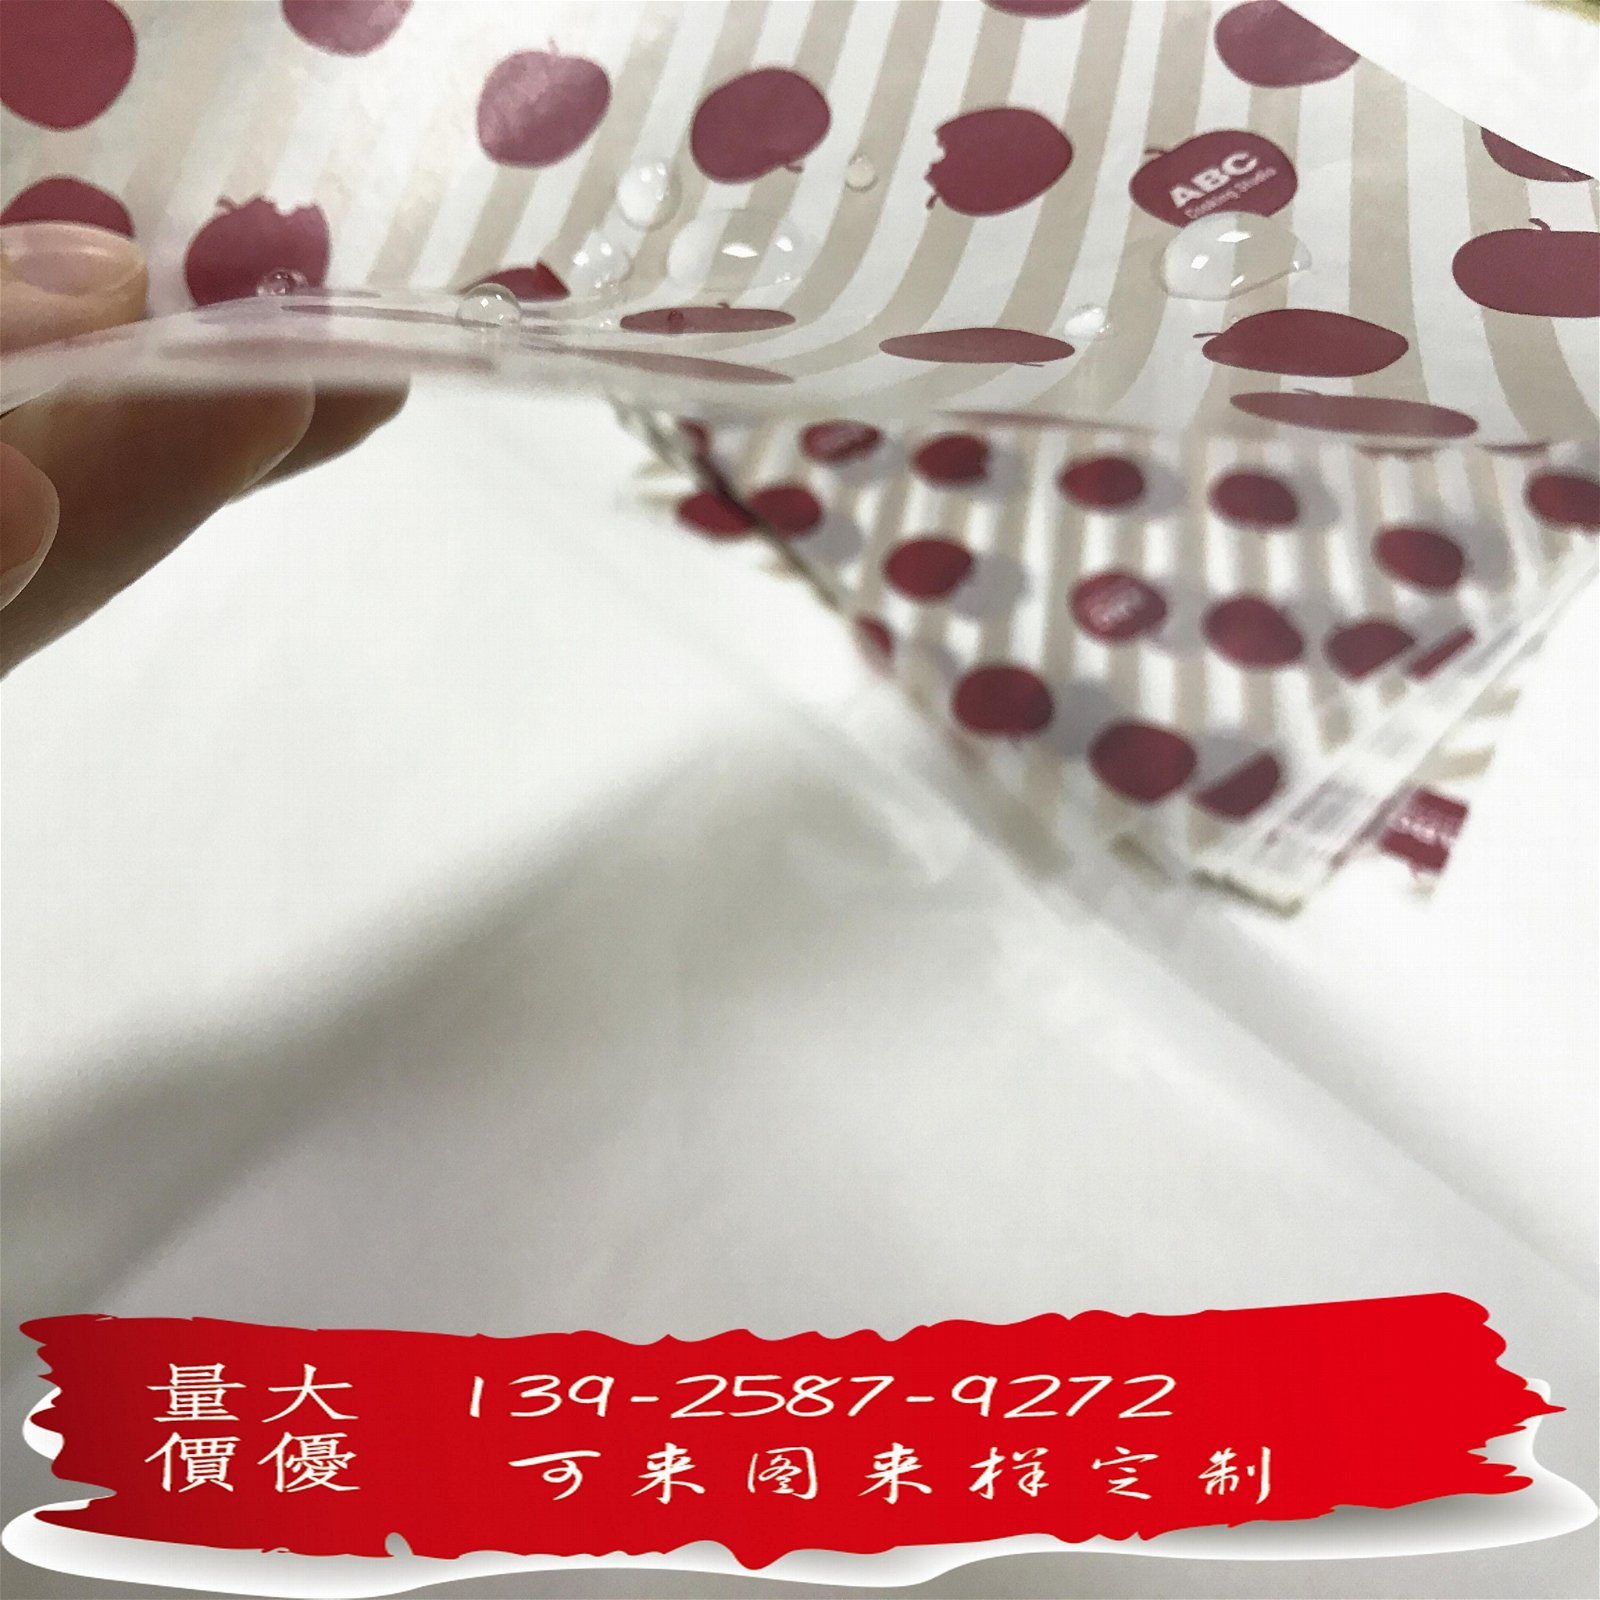 High quality 40 gsm colorful wax paper